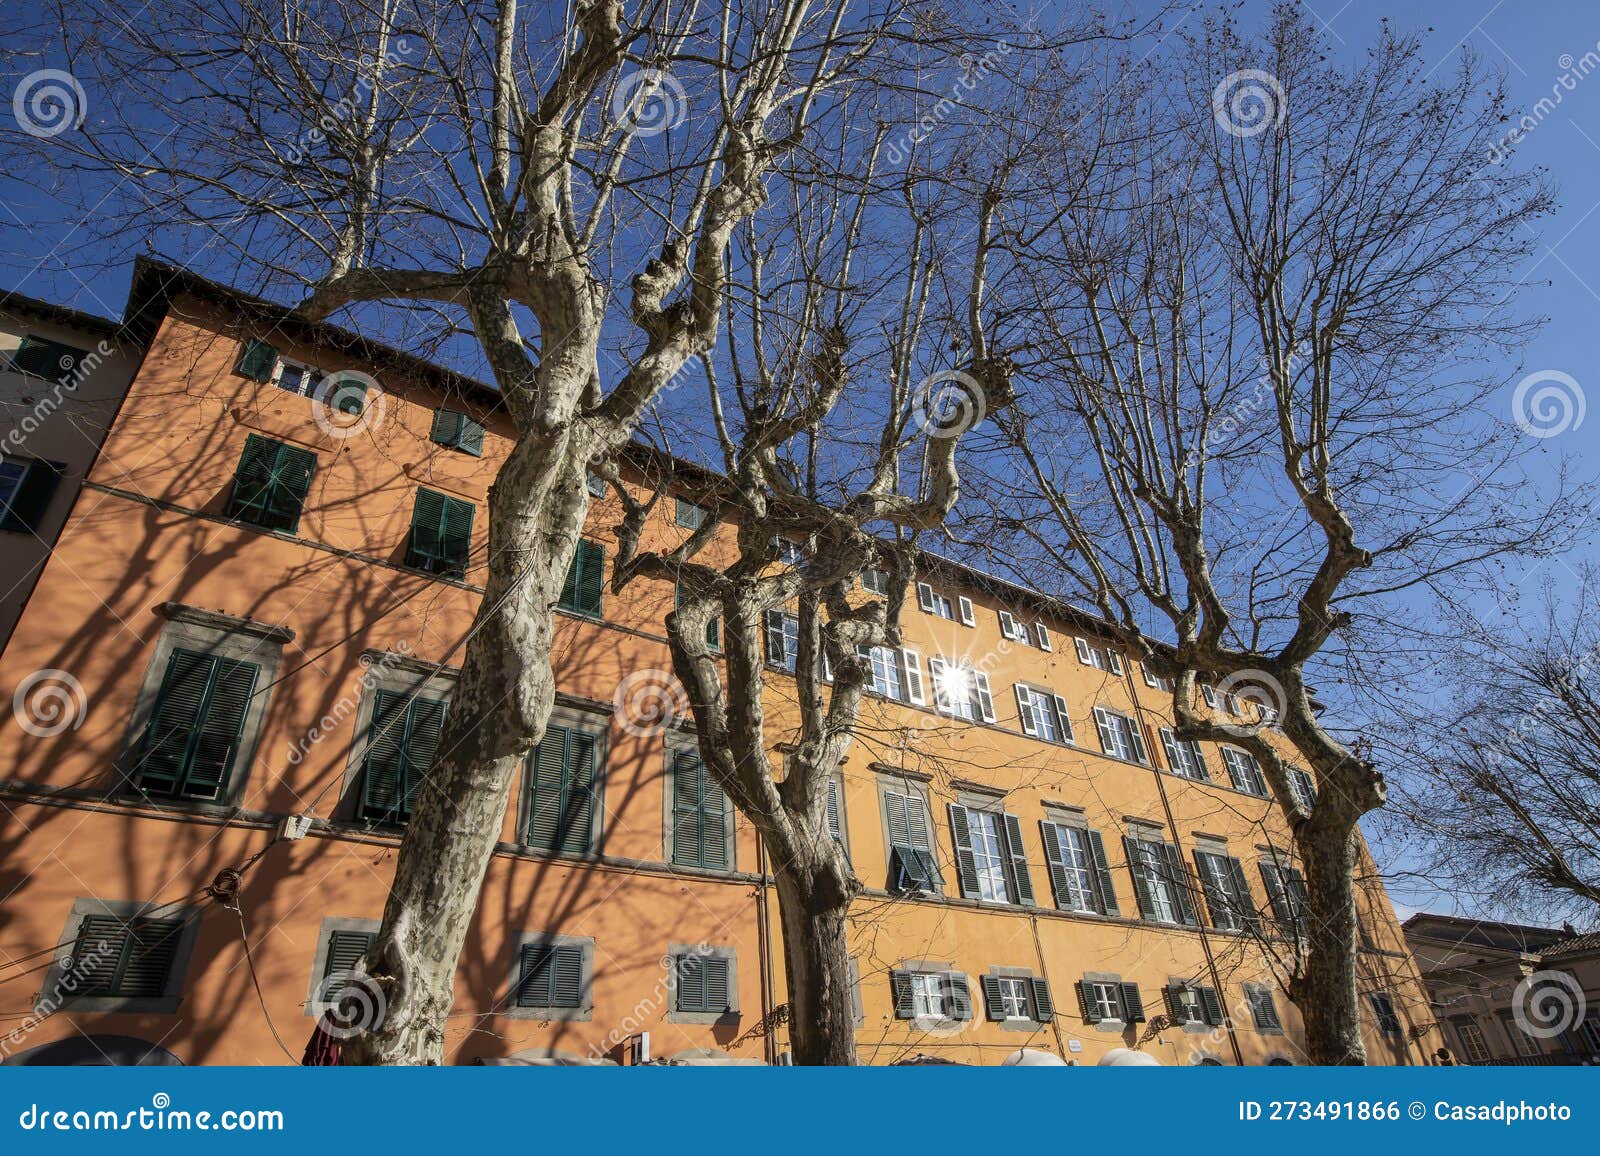 exterior of typical italian buildings in on piazza napoleone. lucca, tuscany, italy